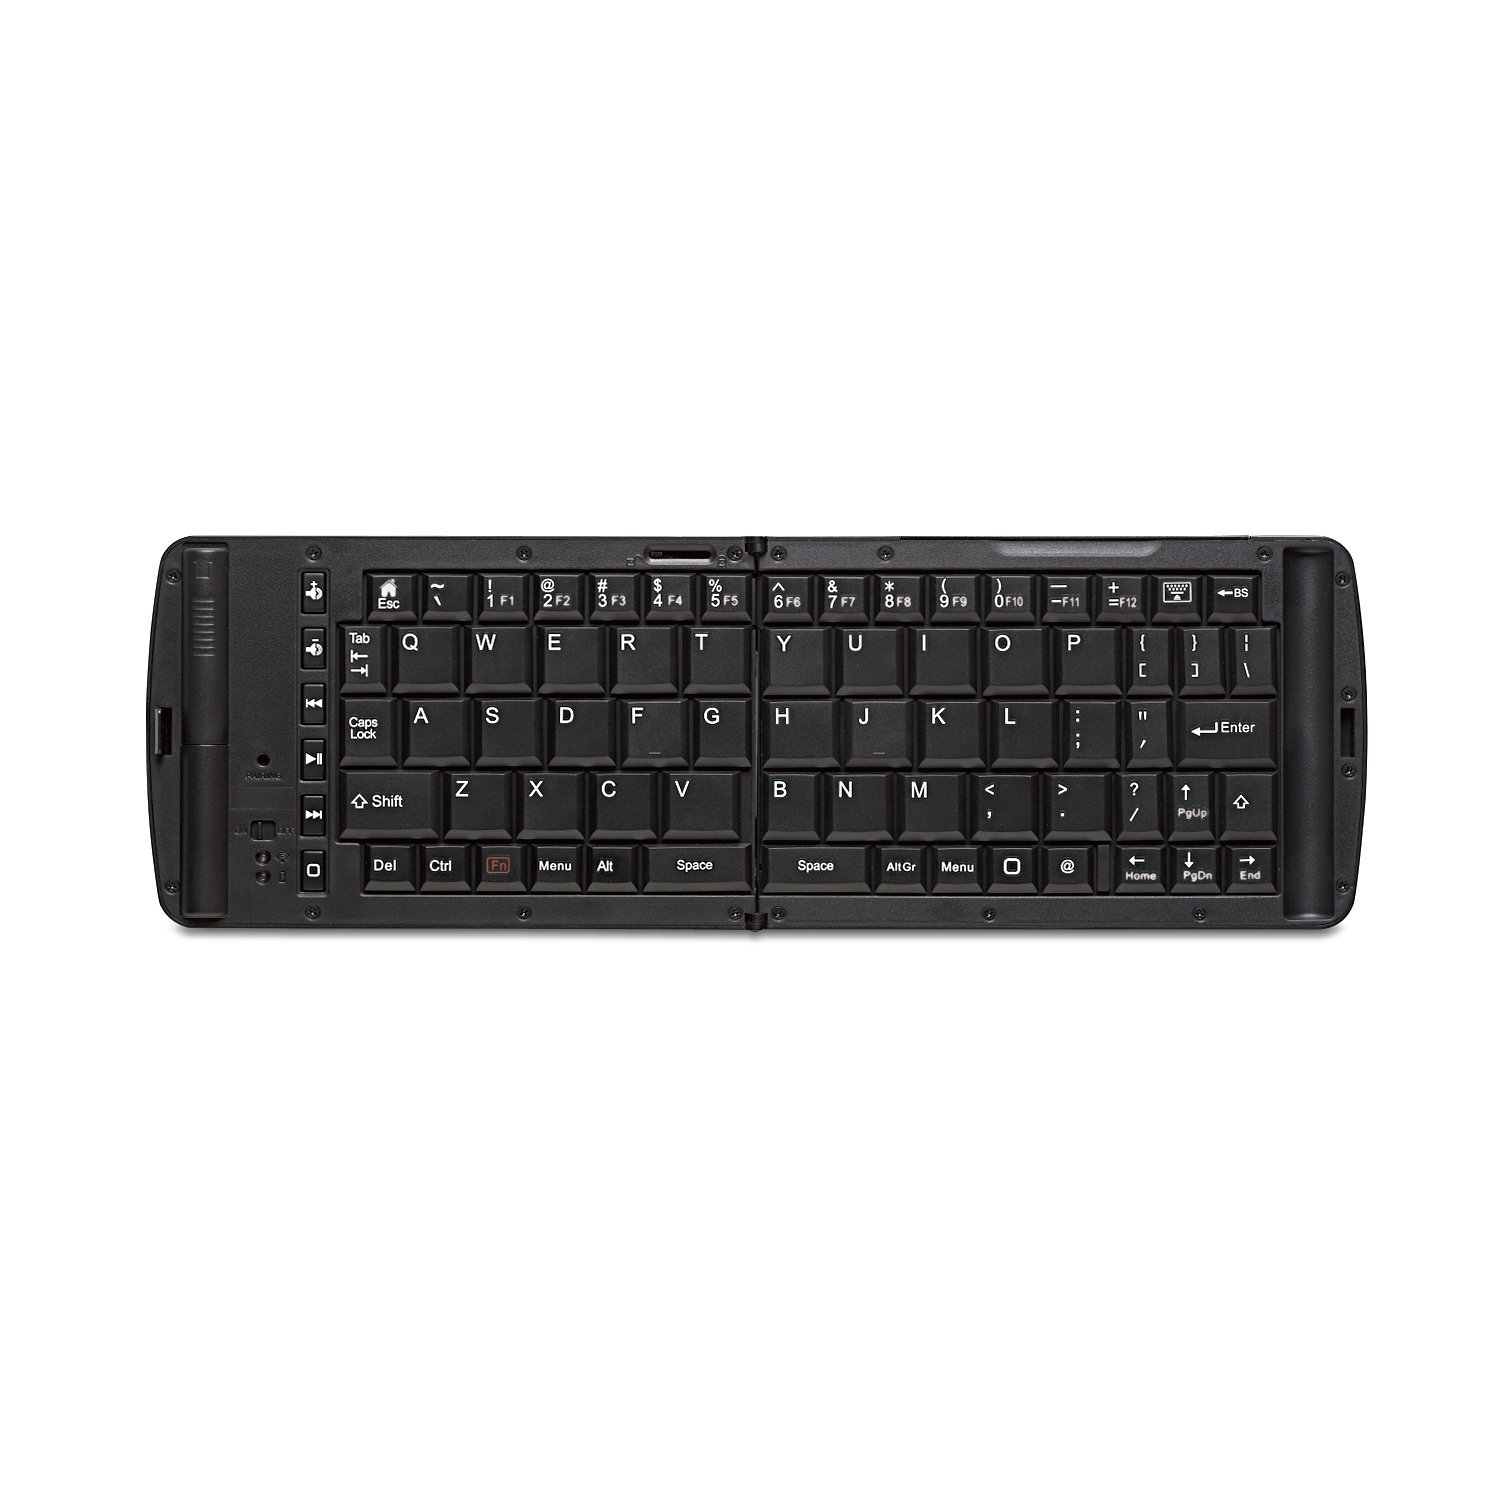 http://thetechjournal.com/wp-content/uploads/images/1110/1319474214-verbatim-97537-wireless-bluetooth-mobile-keyboard-for-all-ios-devices-and-other-tablets-2.jpg